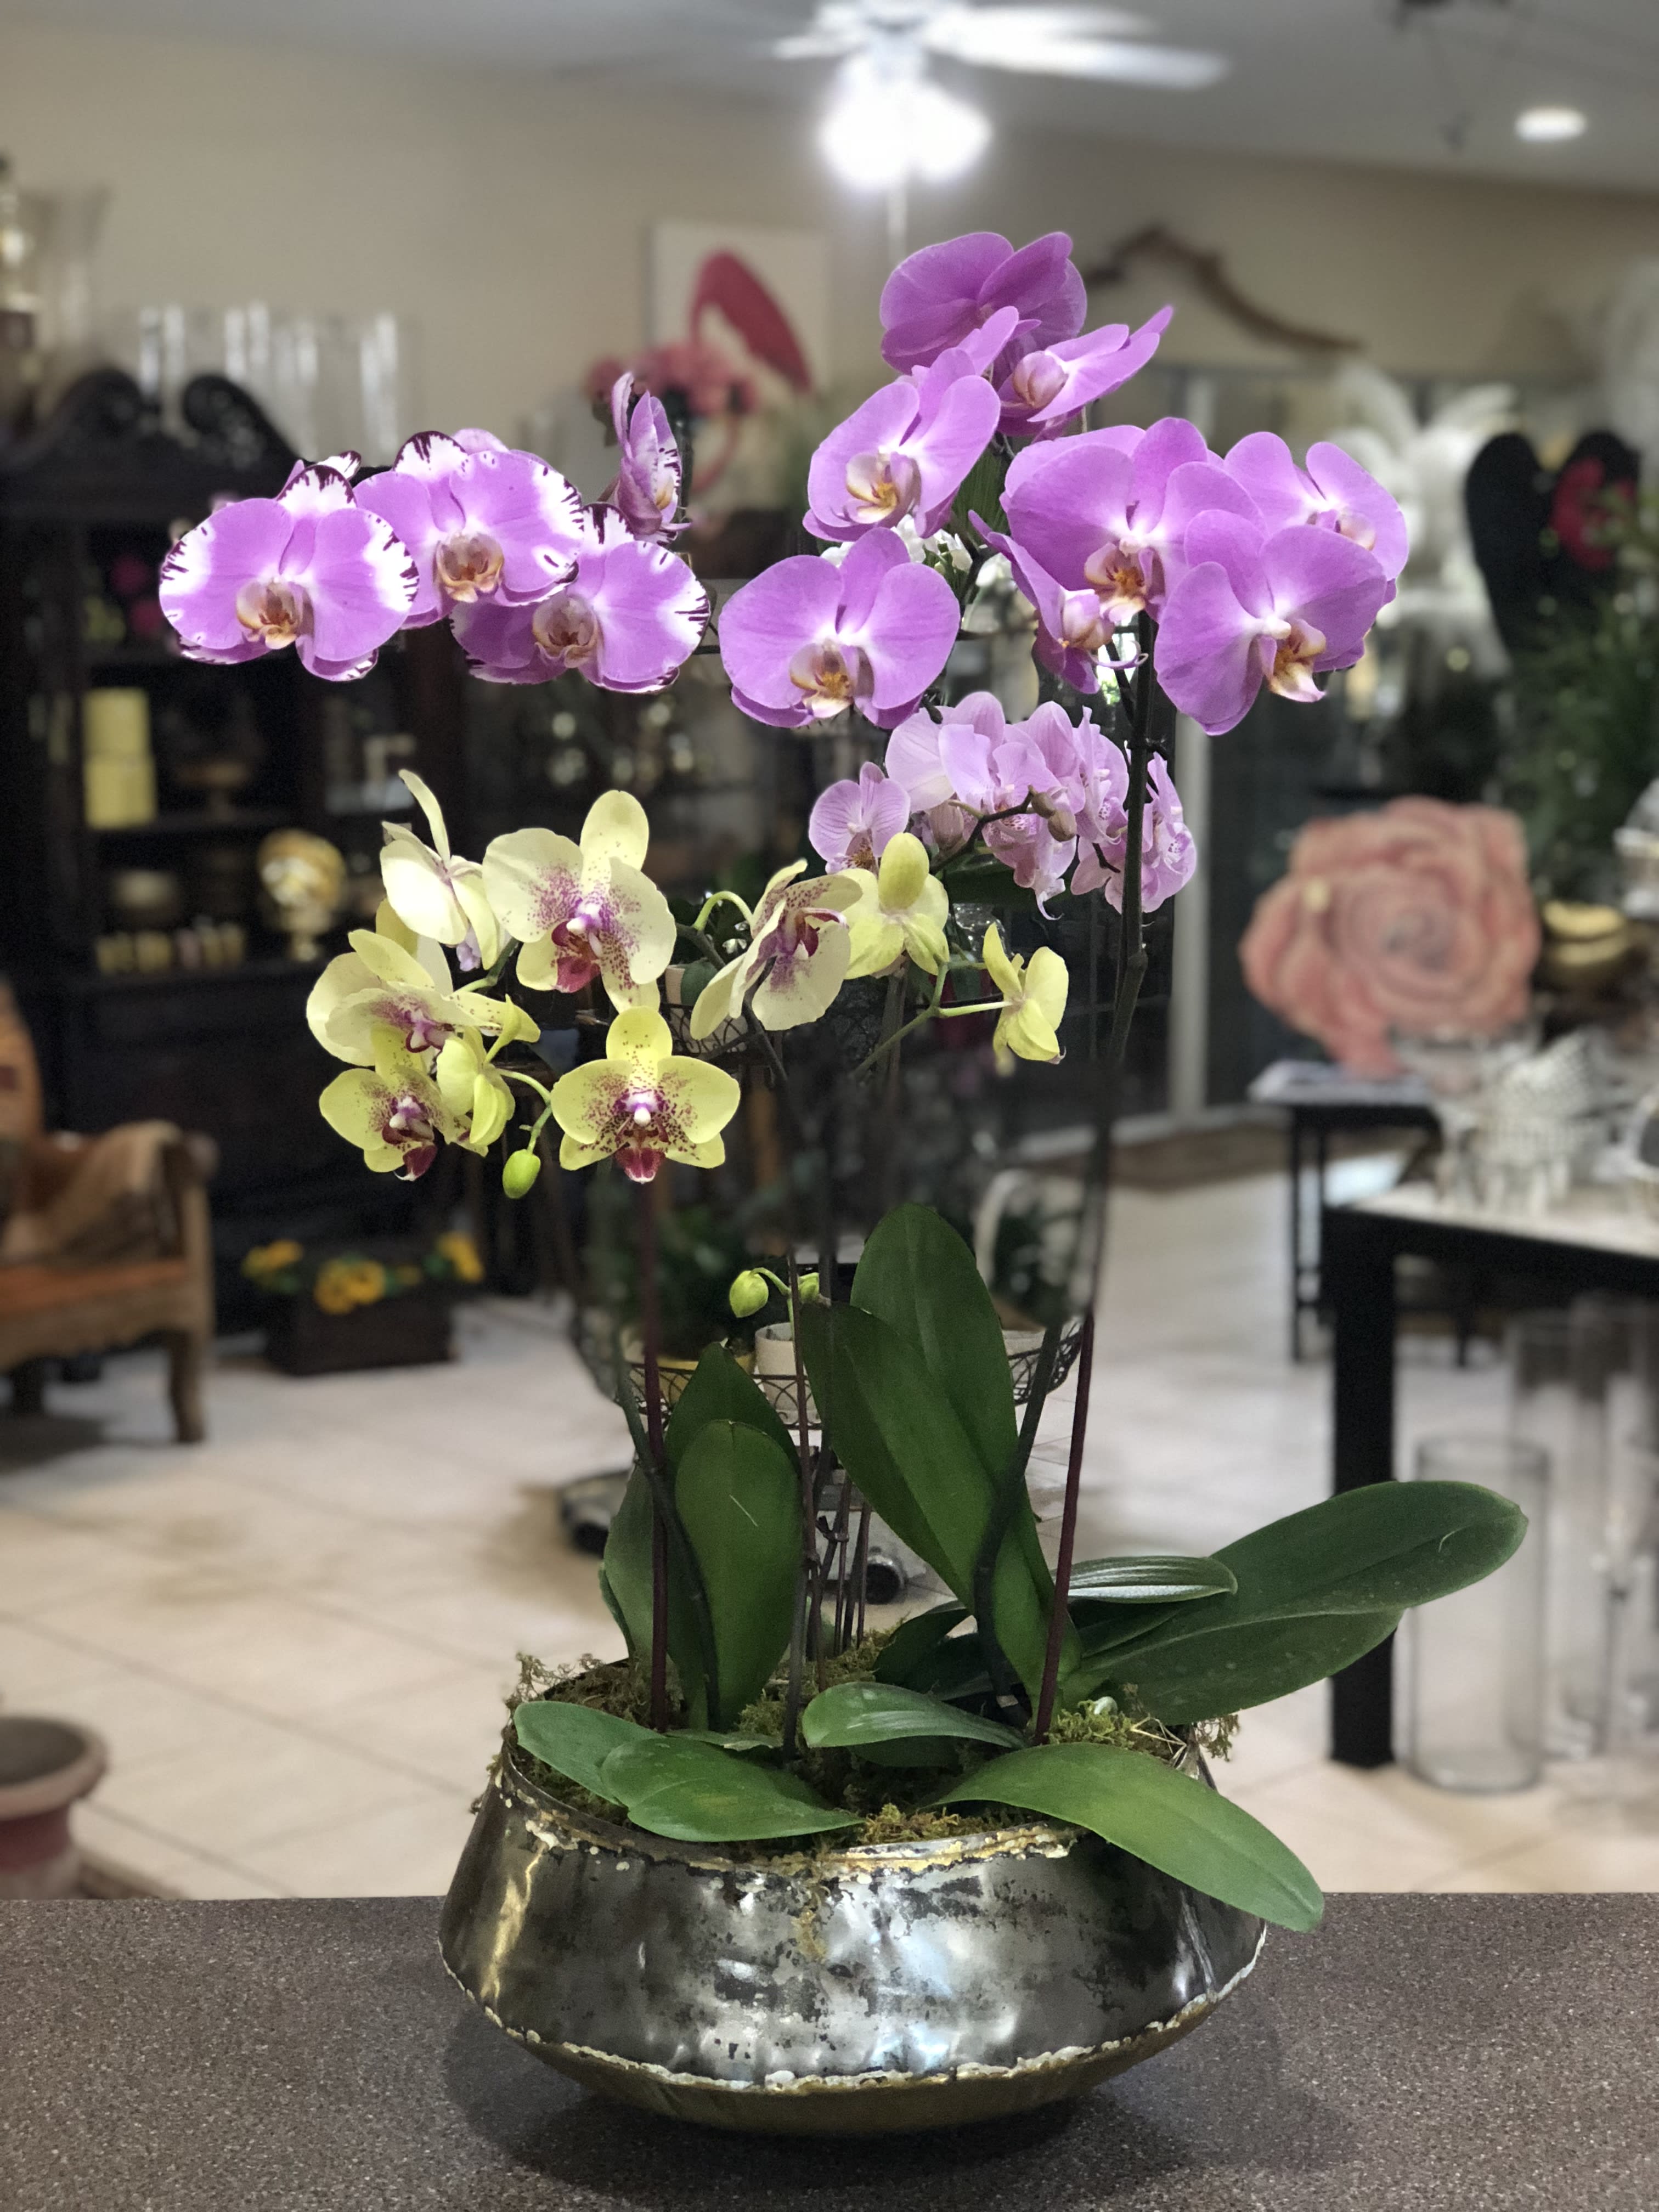 Exquisite Orchid Planter - This stunning display of four orchid plants is the perfect gift for any occasion! Orchid Color and Container may vary based on availability.